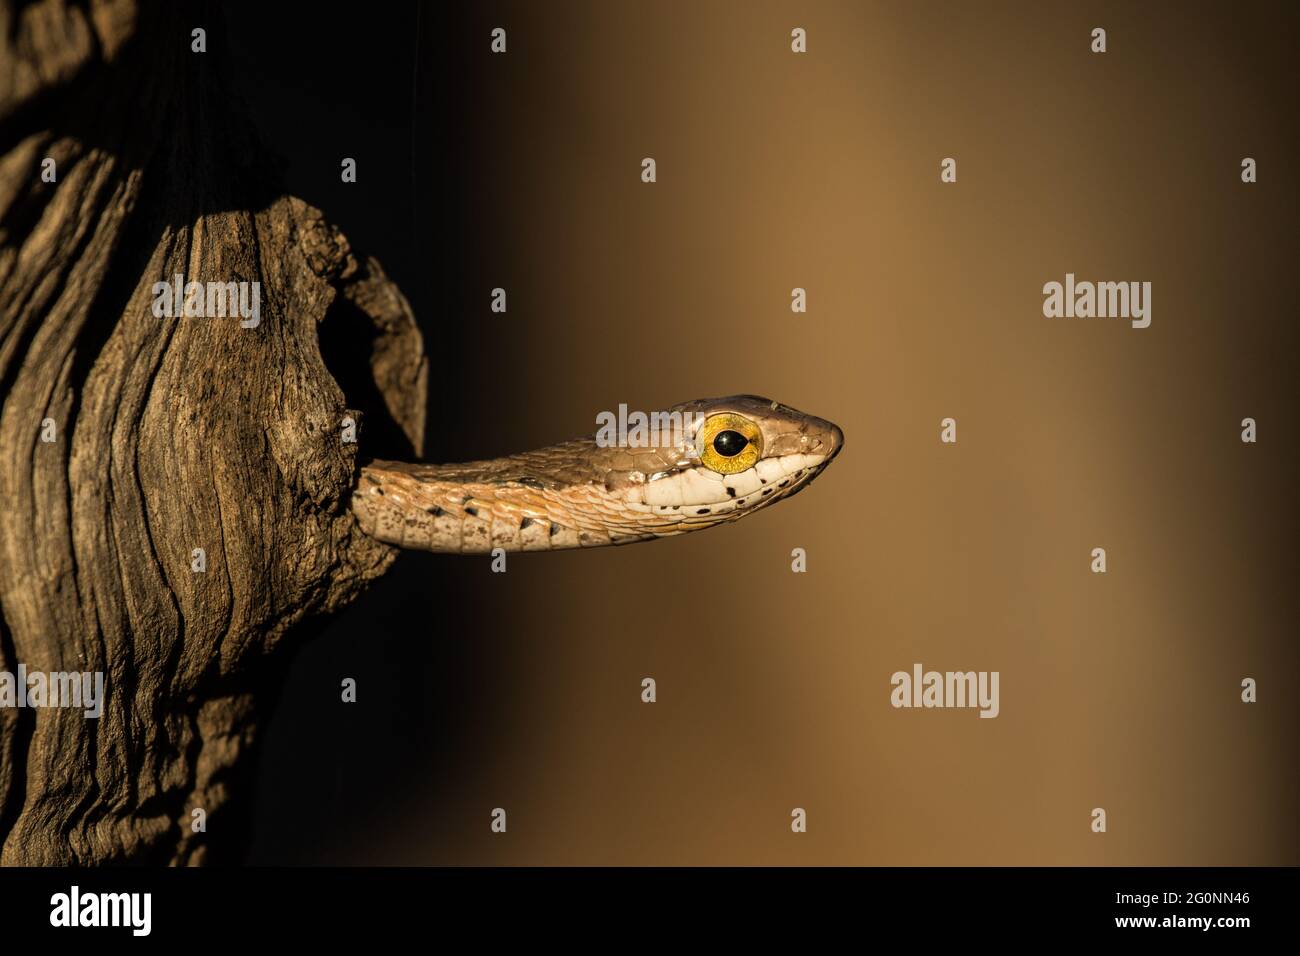 A little snake peeks out a hole in a tree trunk Stock Photo